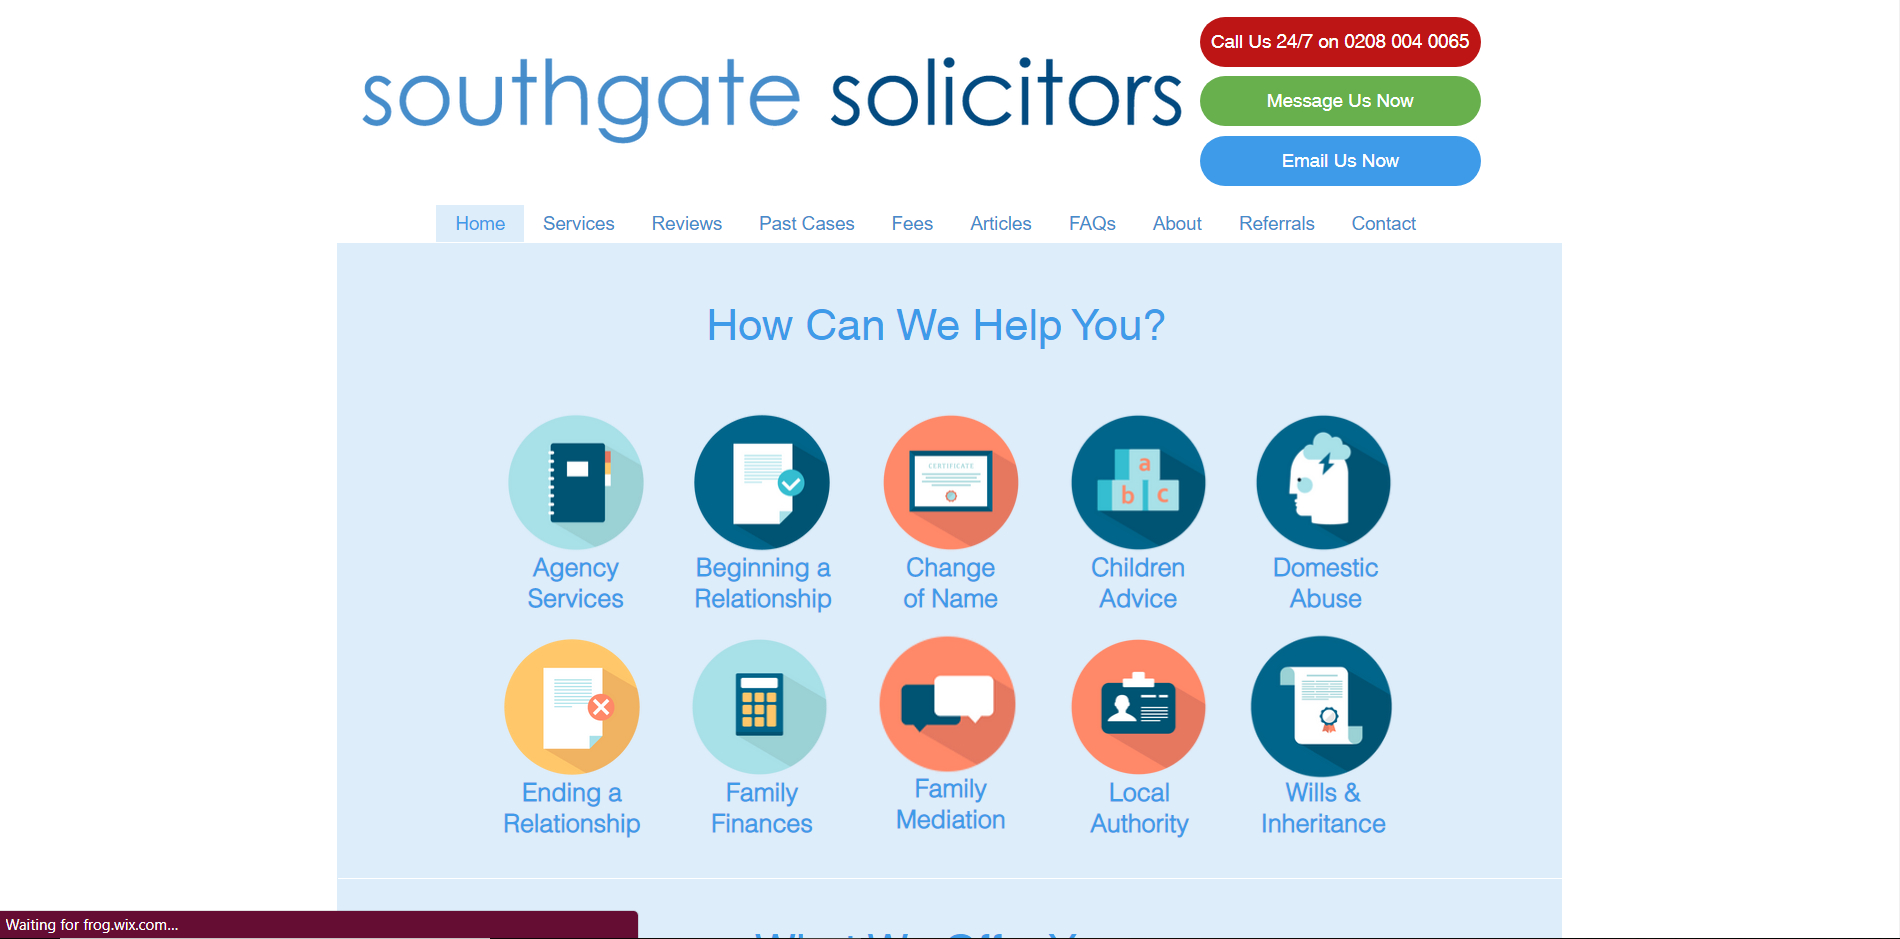 Southgate Solicitors